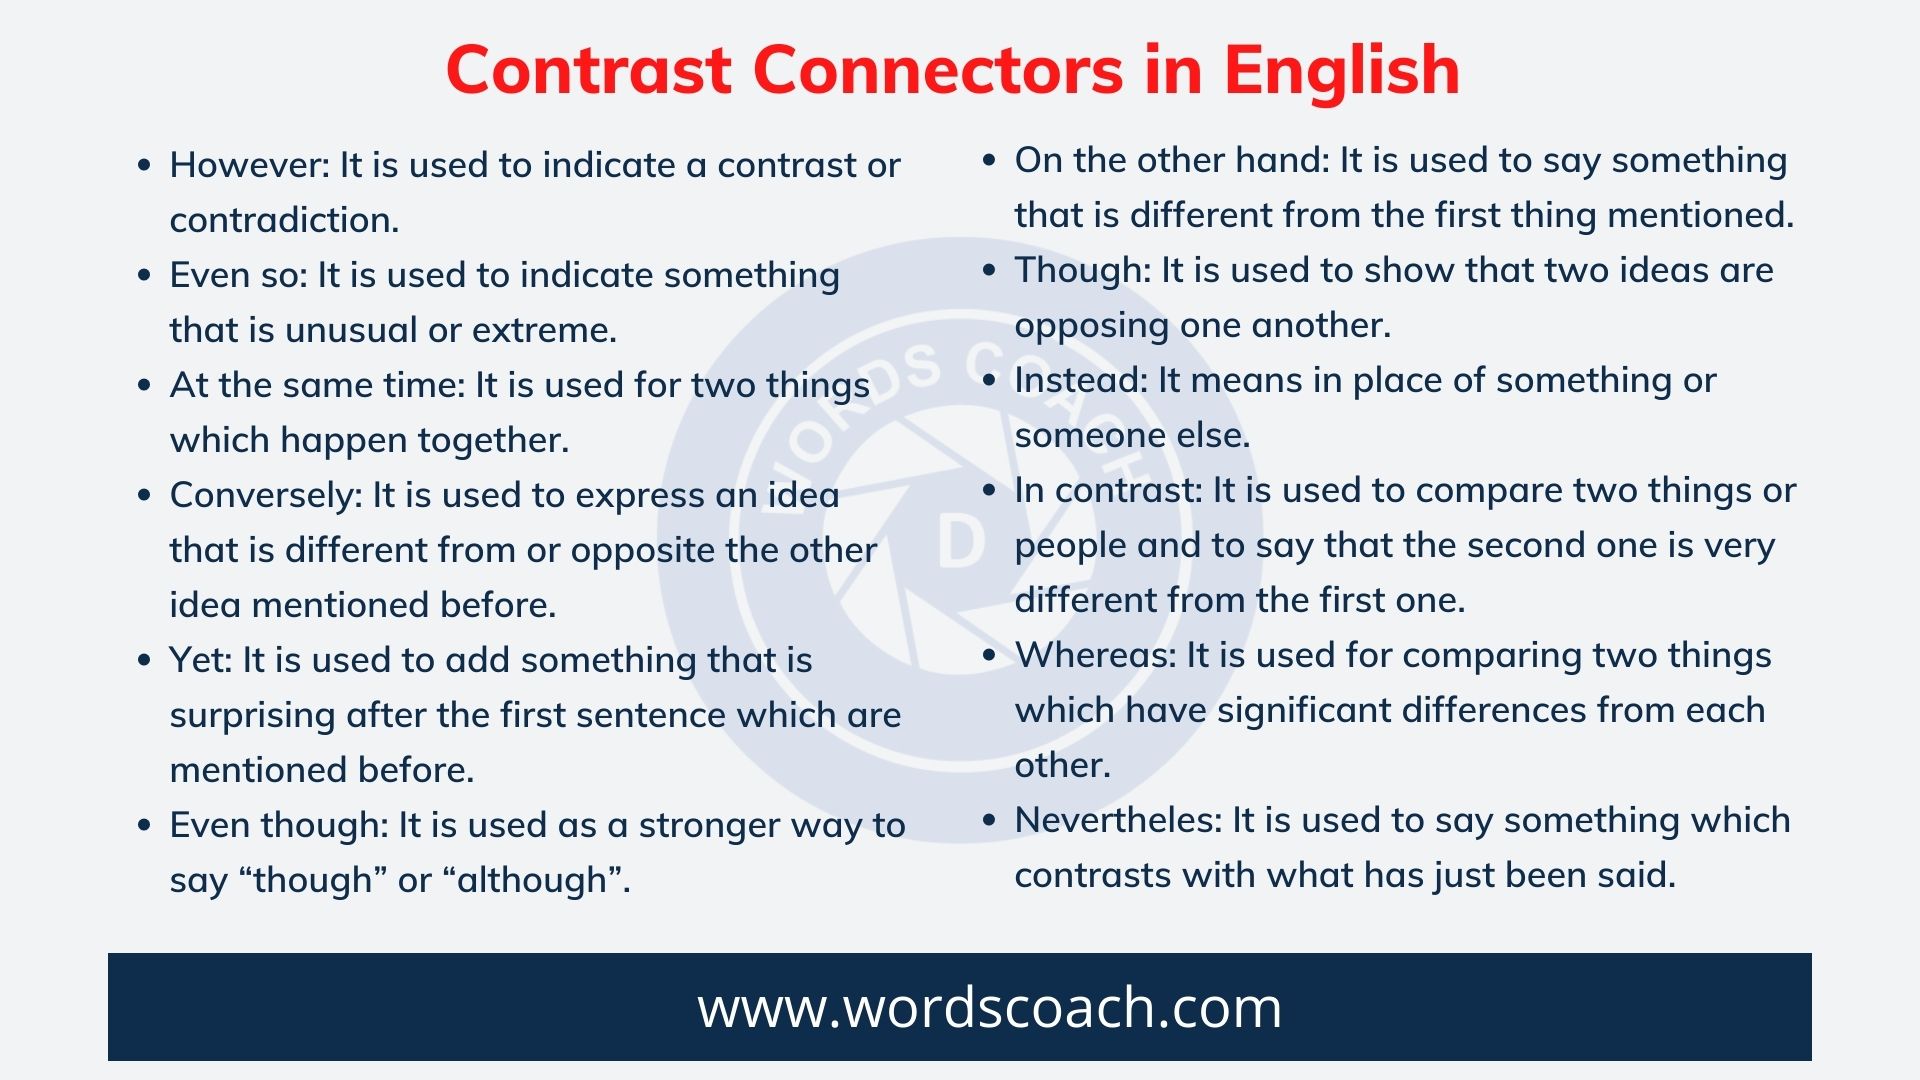 compare contrast words